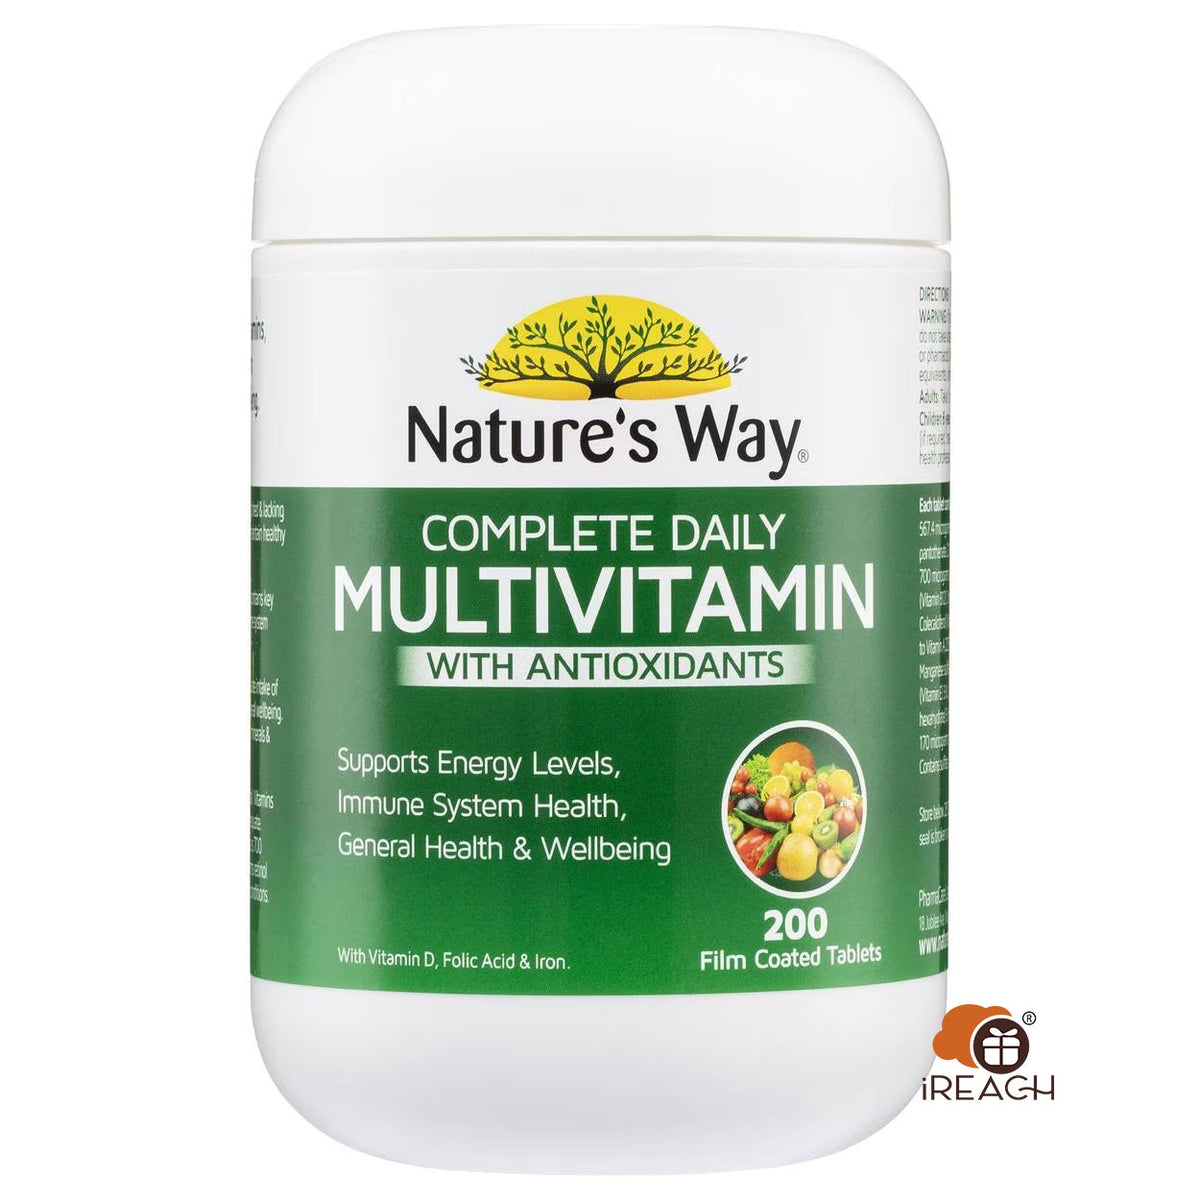 Nature's Way Complete Daily Multivitamin 200 Tablets Adults, 6+ years.